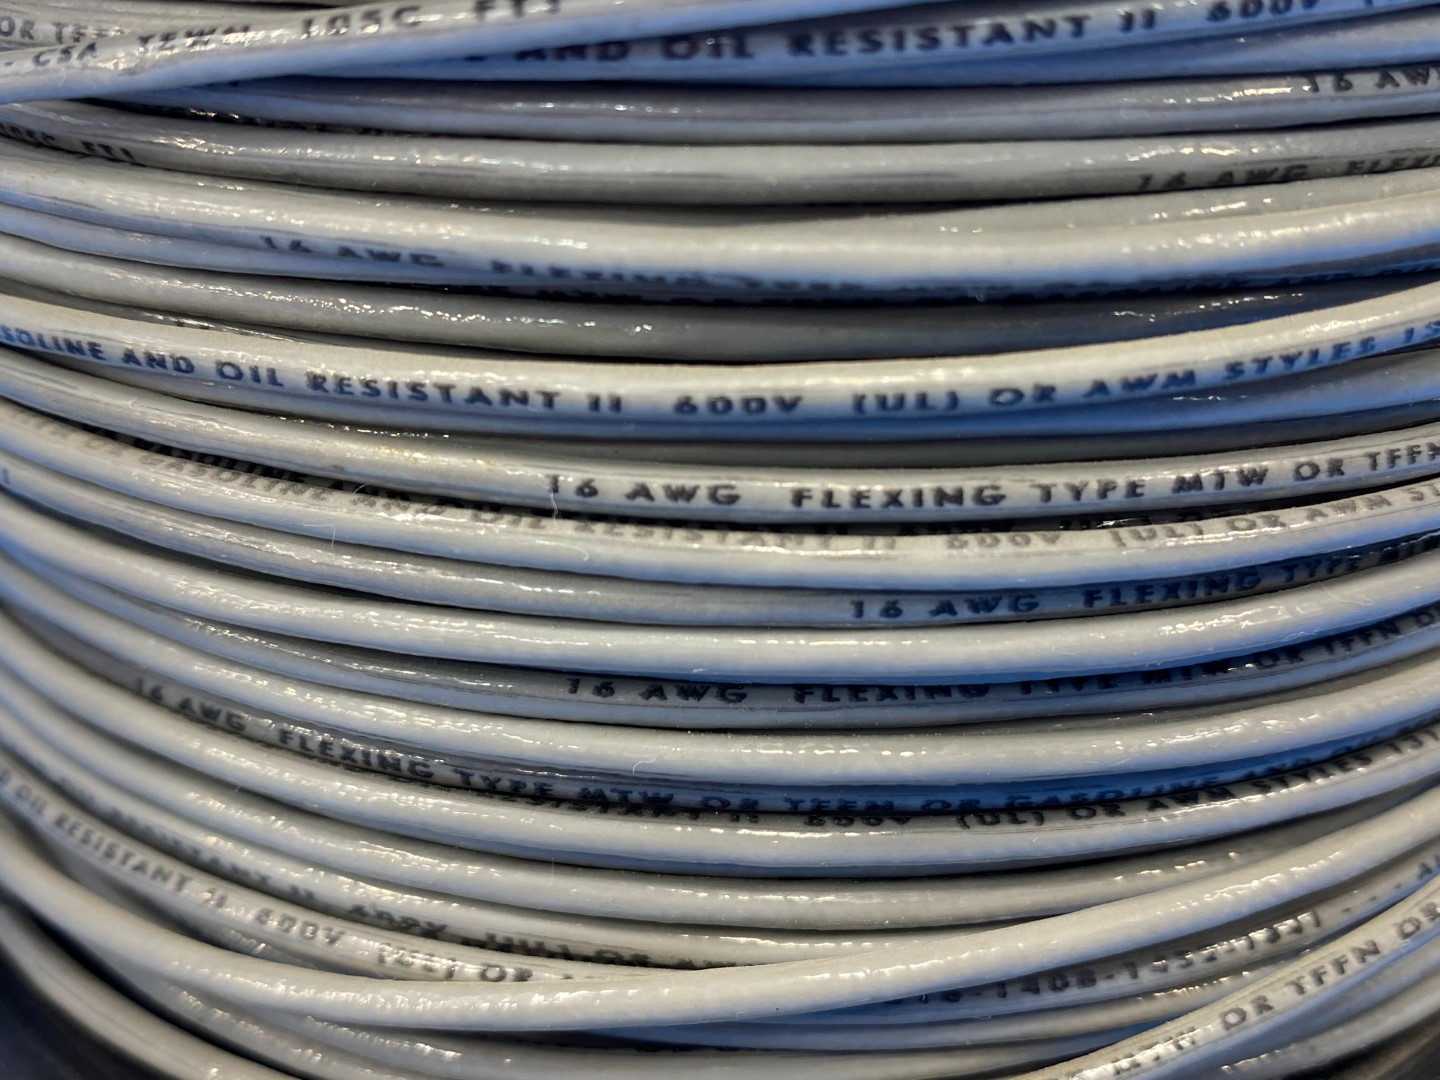 16 Awg Grey Copper Wire Type MTW or TFFN 440ft